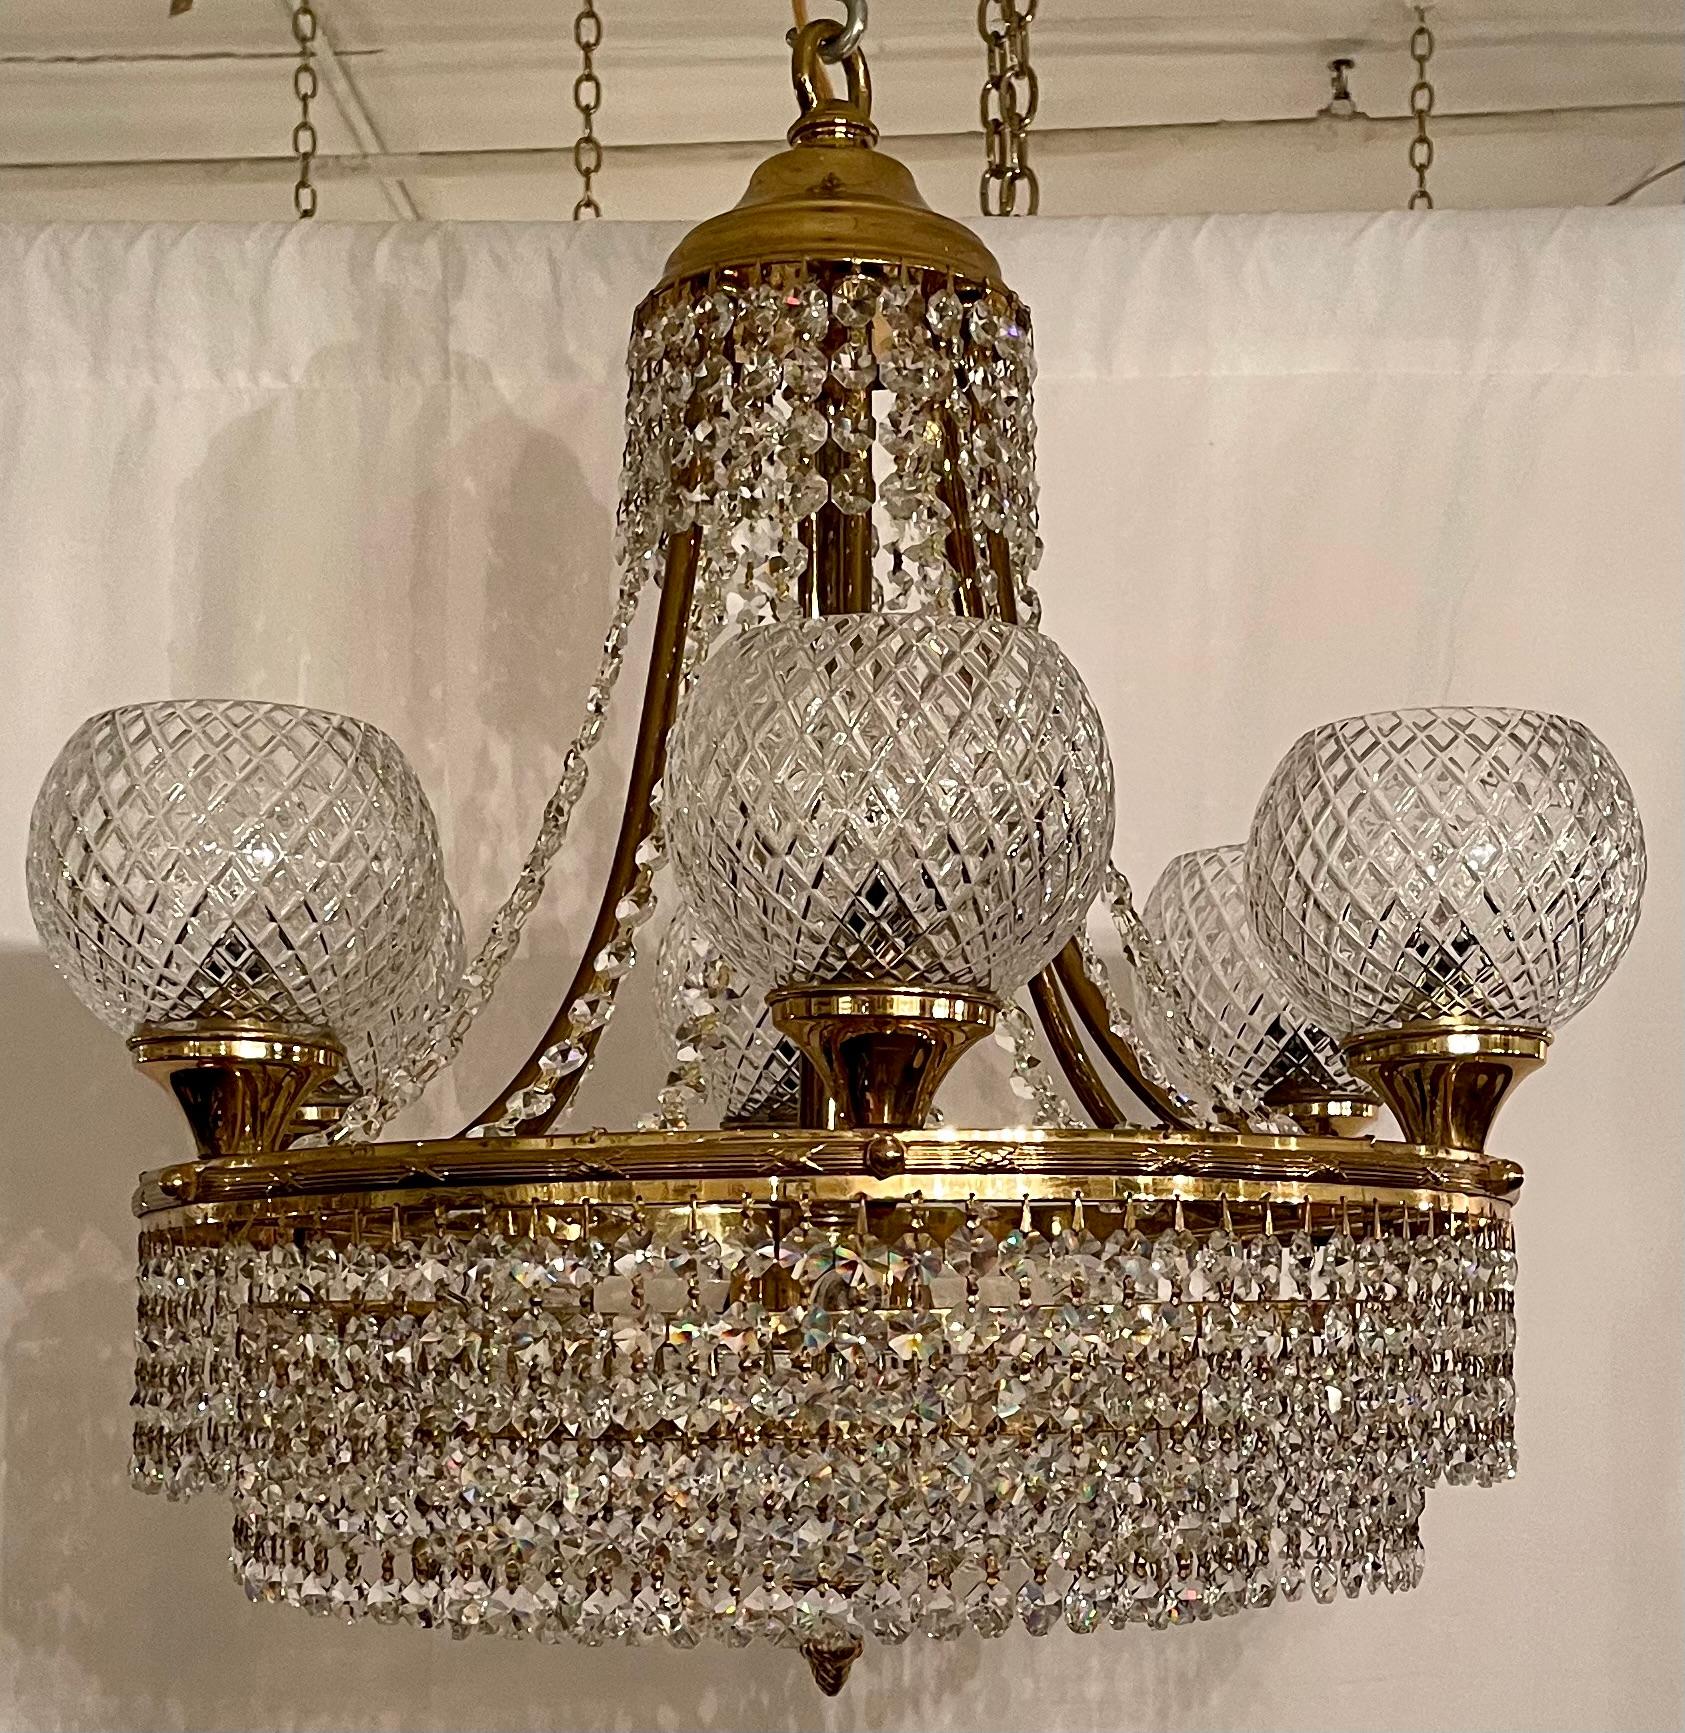 Antique Art Deco Cut Crystal and Gold Bronze Chandelier, Circa 1940.
Per the last photo, we have two of these chandeliers available and they can be sold as a pair.